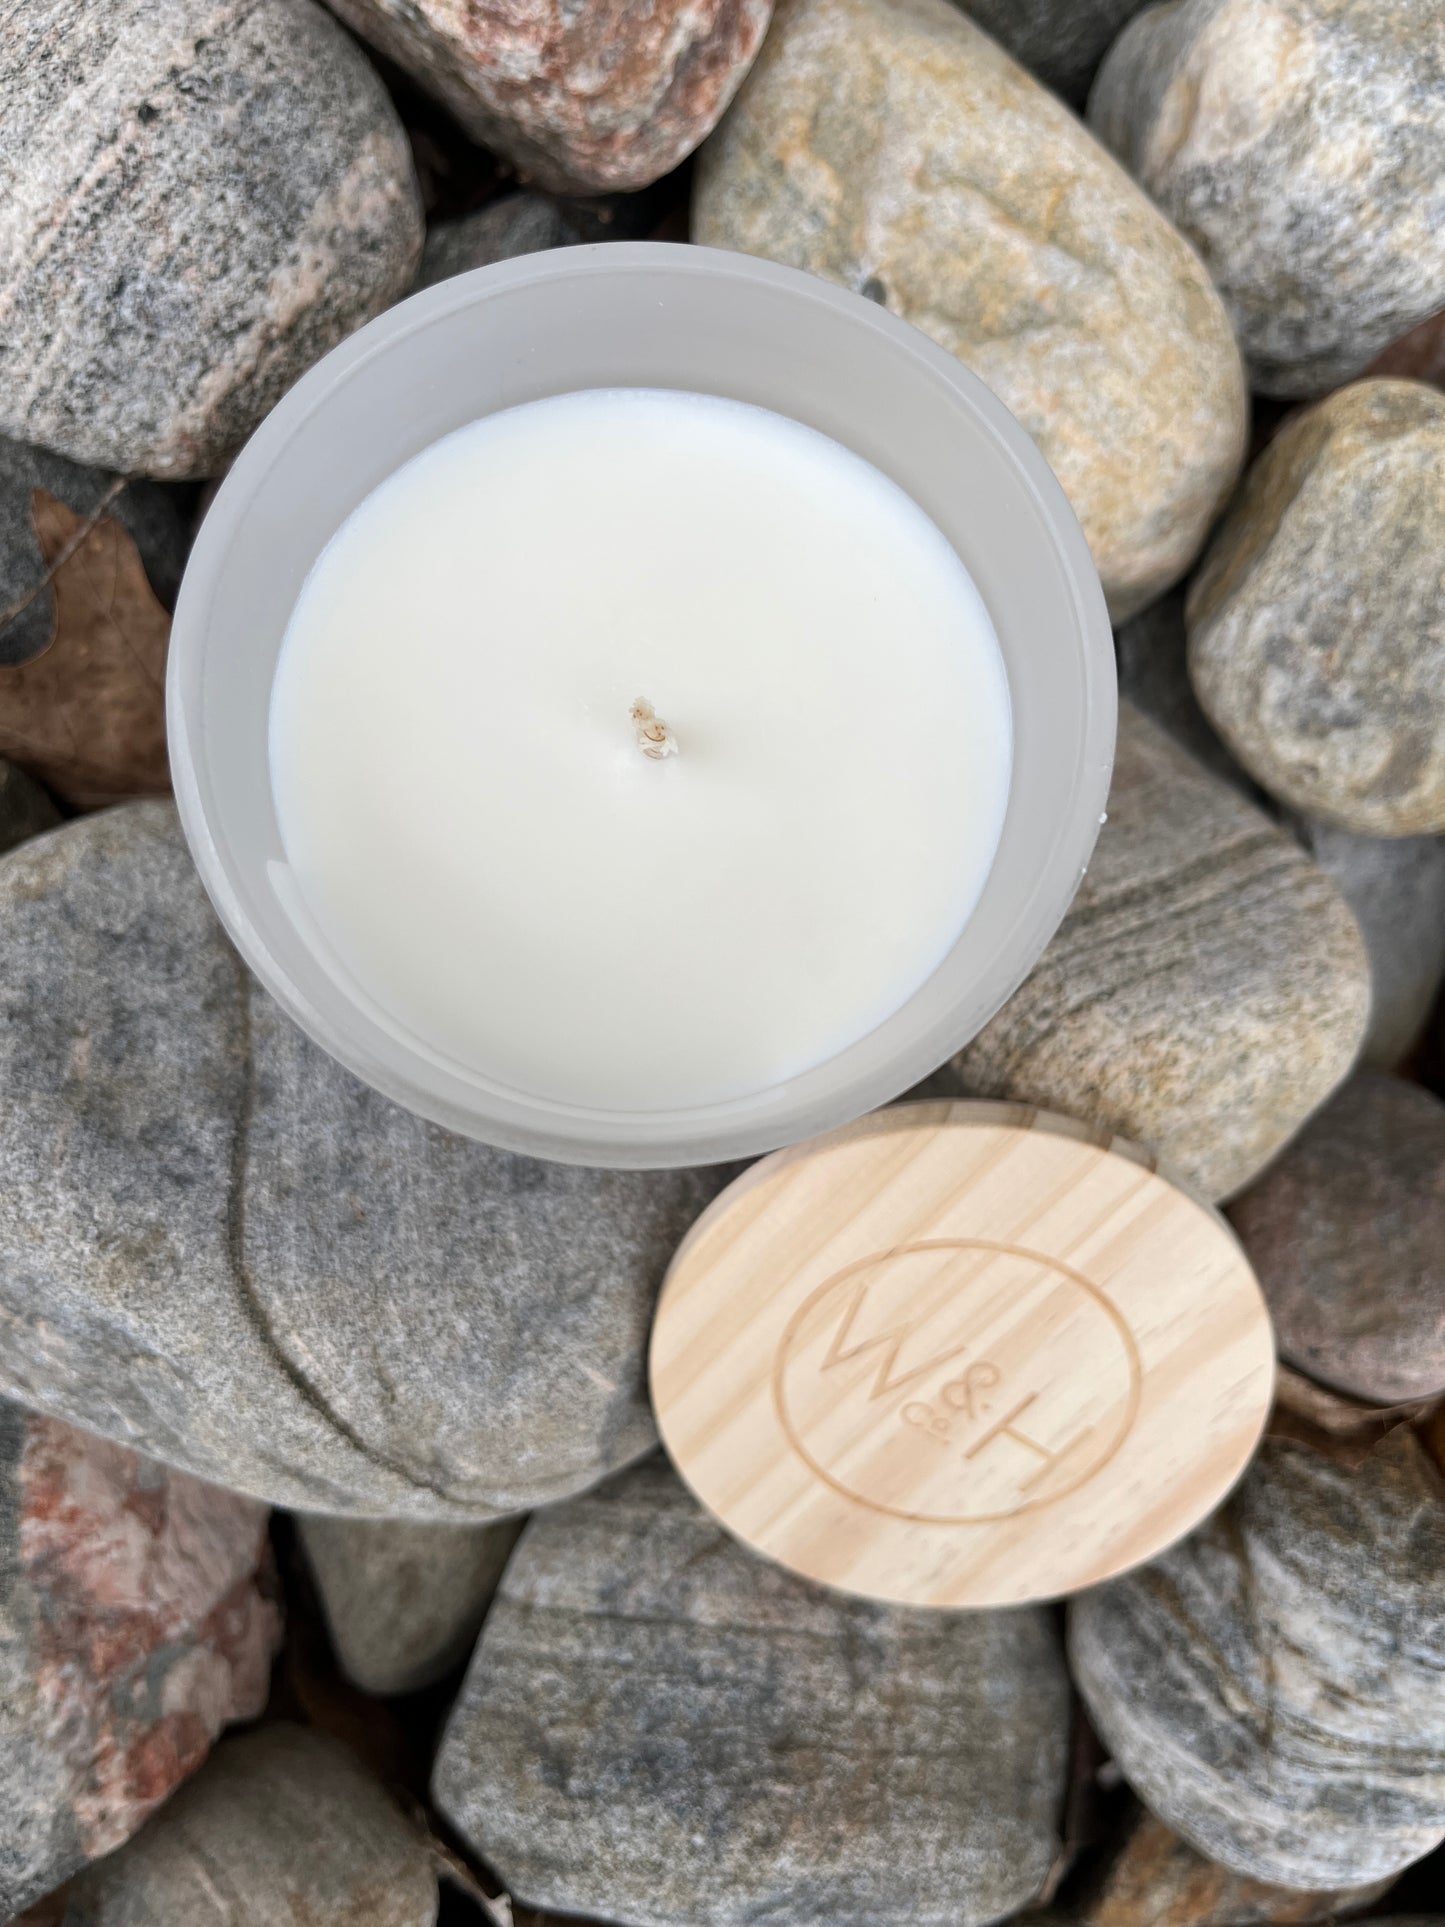 Before Rain Candle | Wood and Heart Design Co.